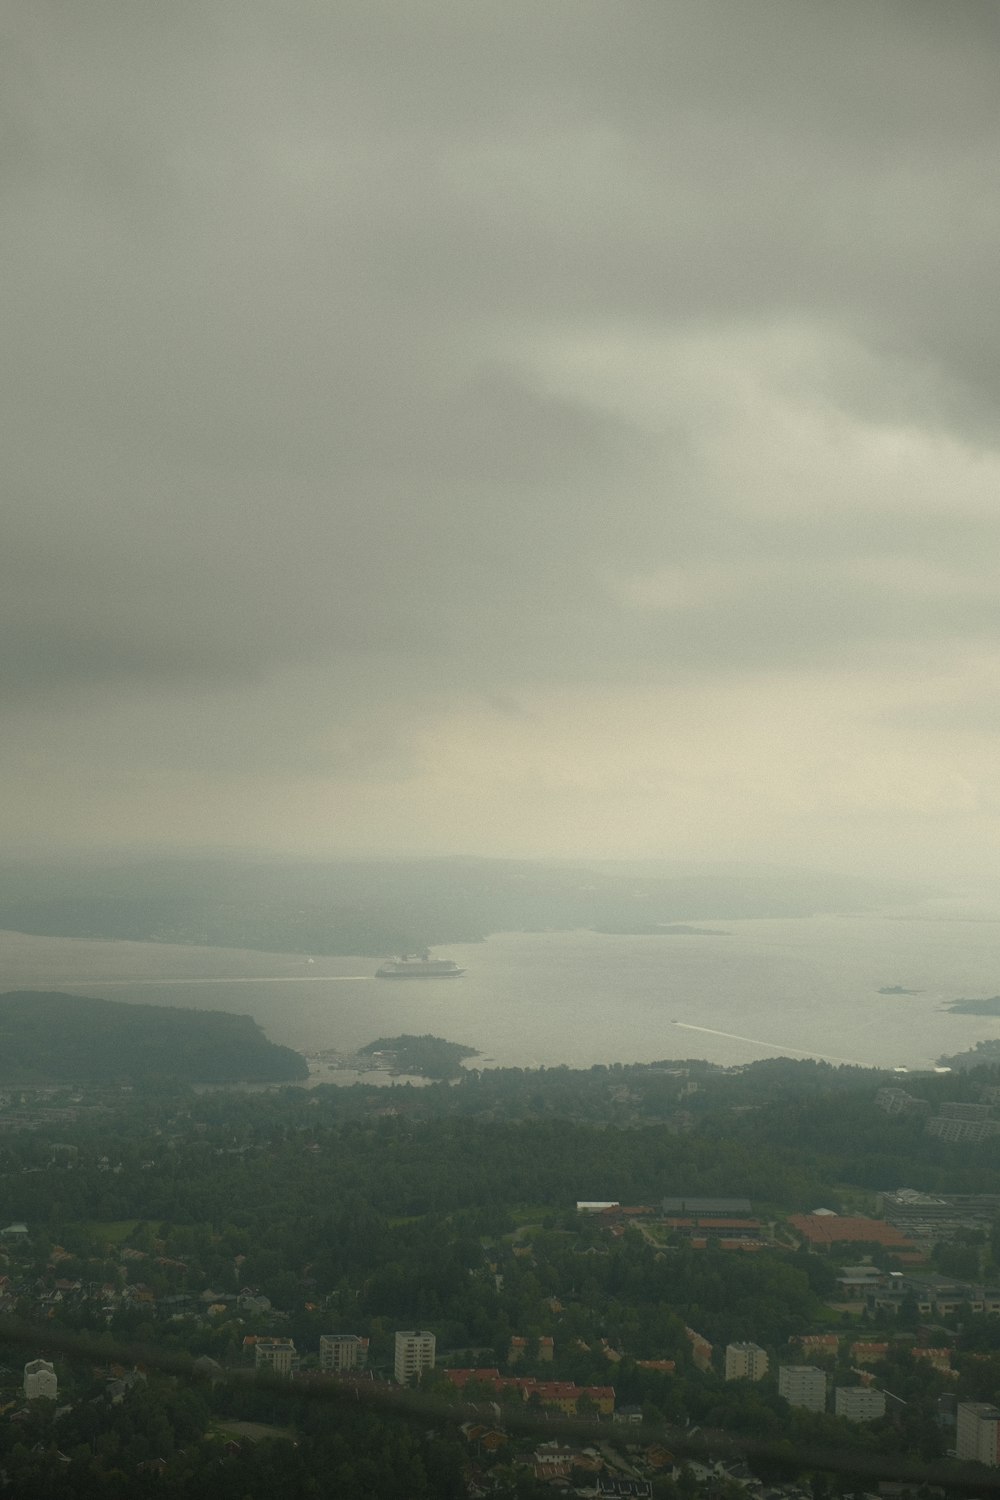 a view of a large body of water under a cloudy sky